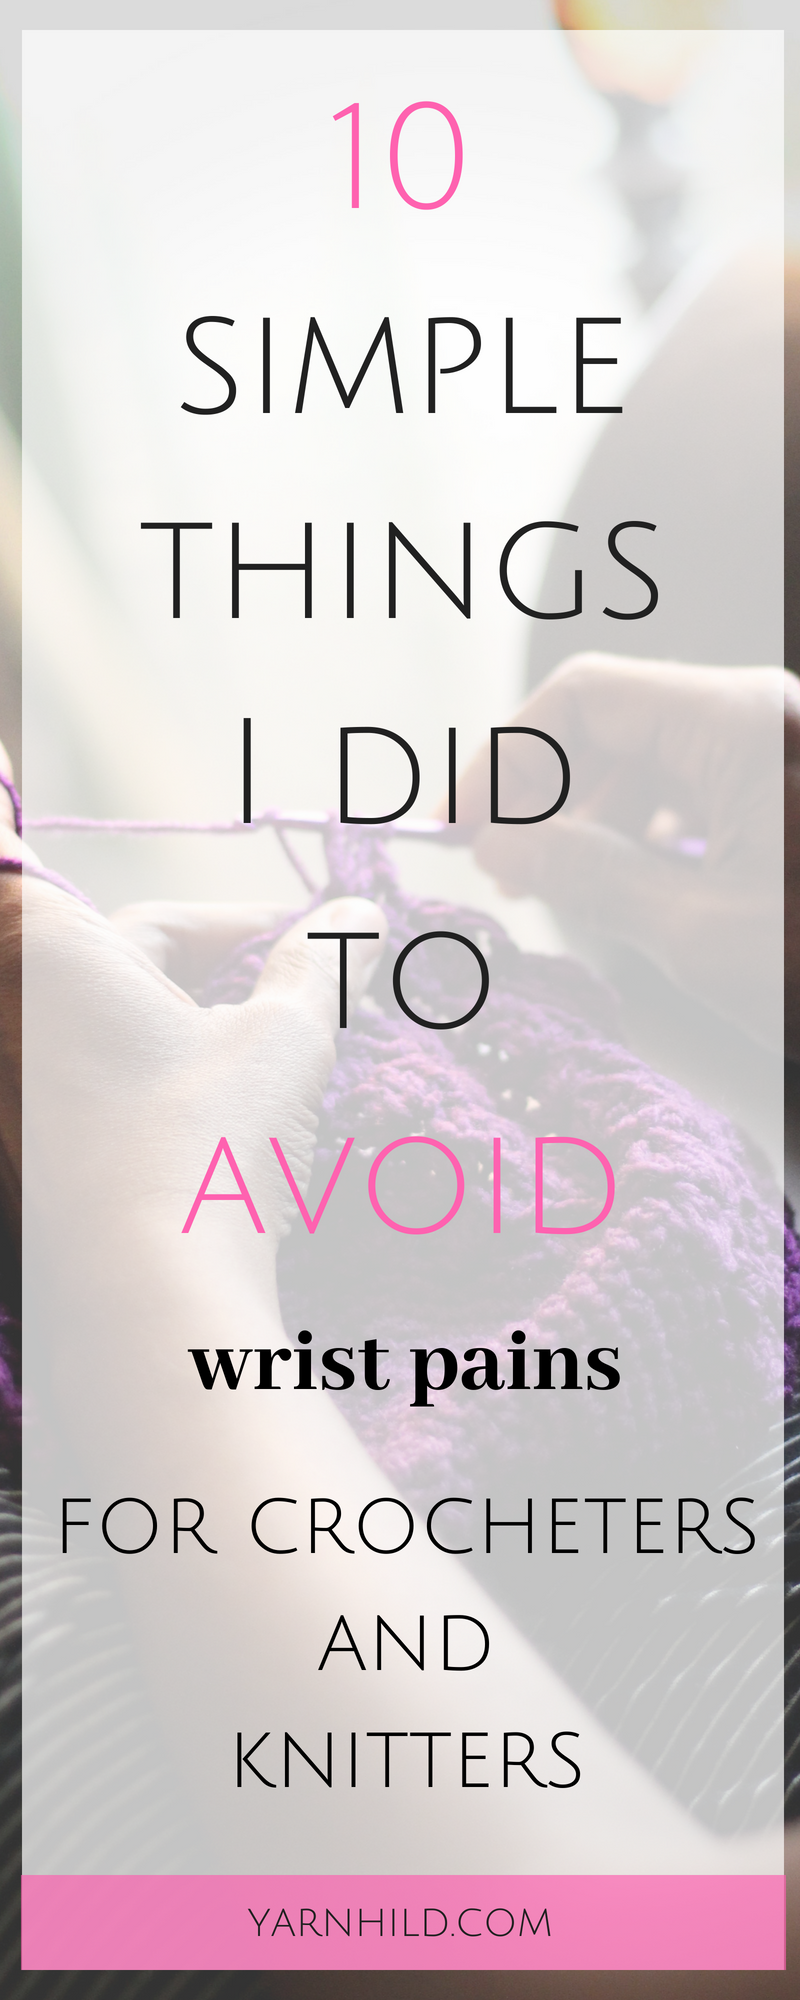 Are you suffering from wrist pains from to much crocheting or knitting? Learn how you can get rid of wrist pains.